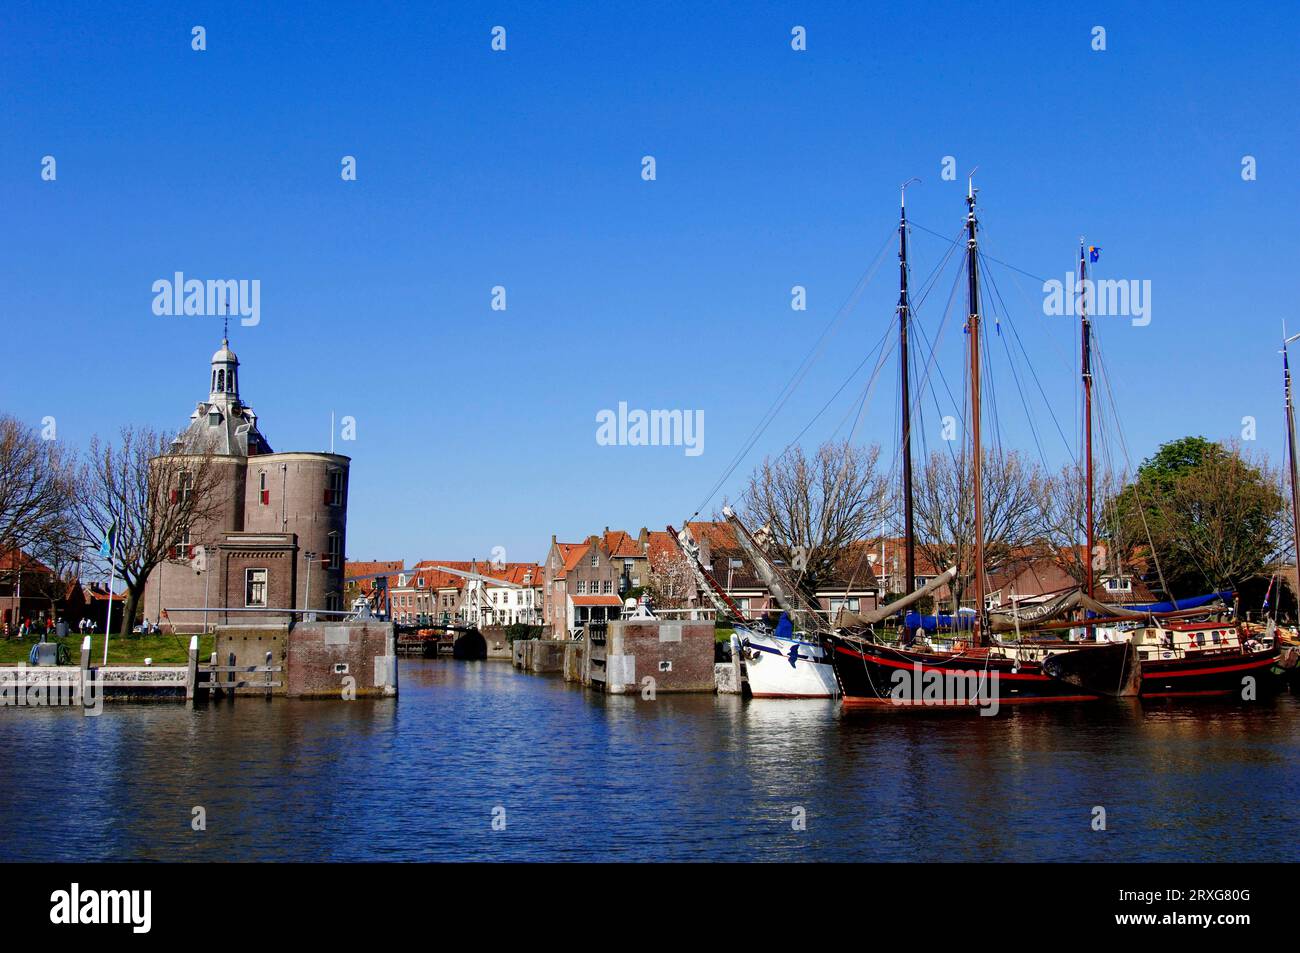 Defence defence tower 'Dromedaris' and ships in the harbour, Enkhuizen, Netherlands Stock Photo